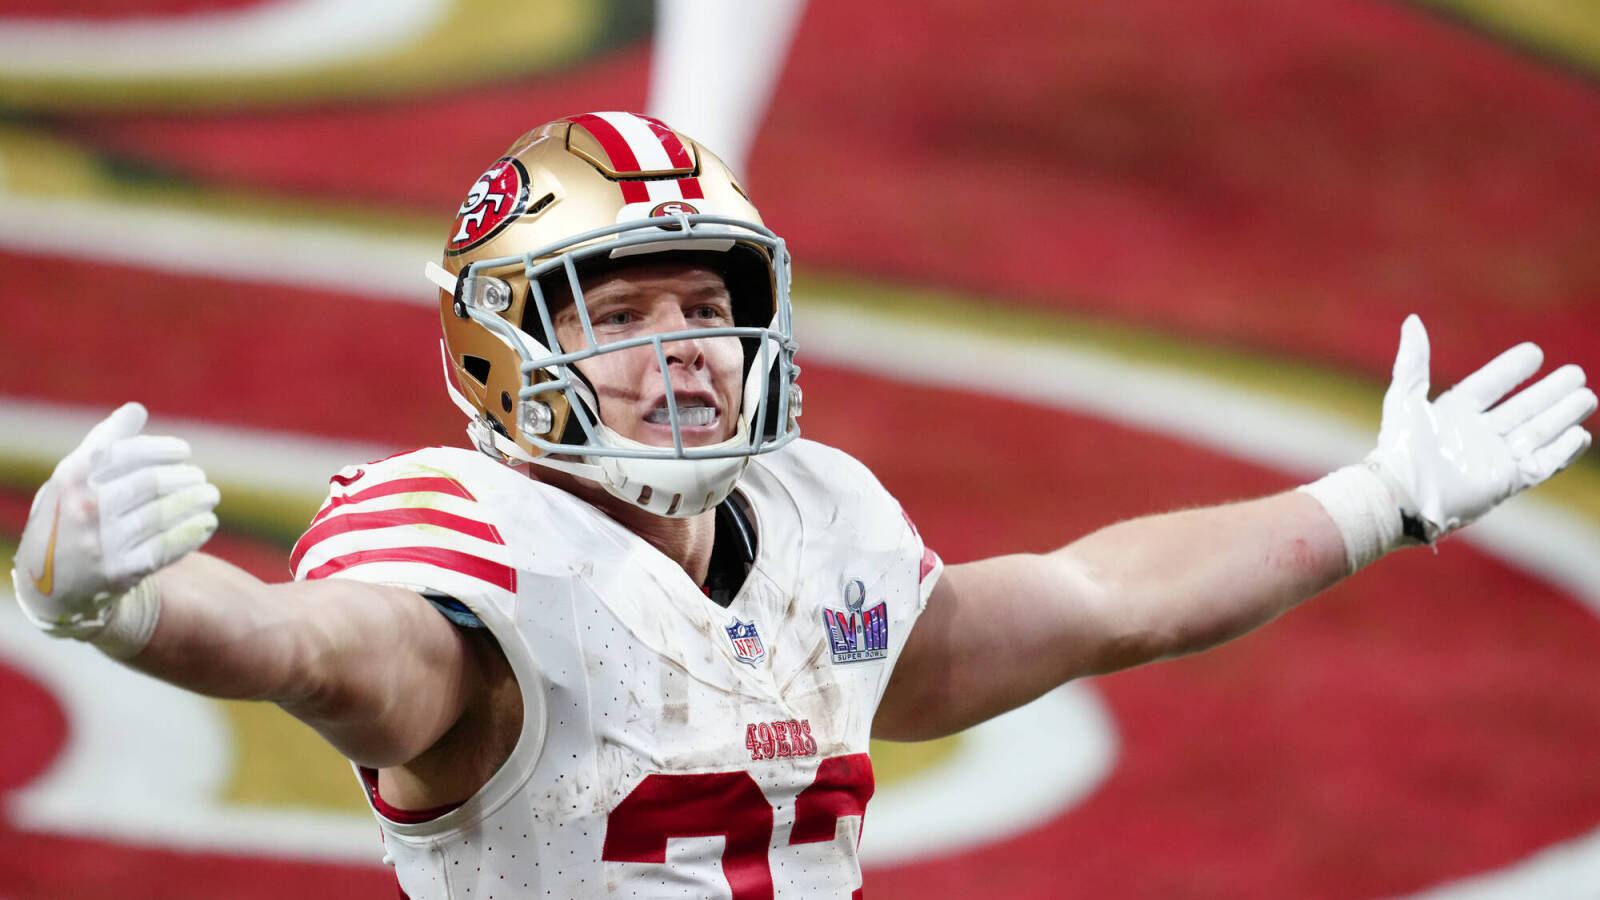 Watch: 49ers' Christian McCaffrey scores touchdown on incredible trick play